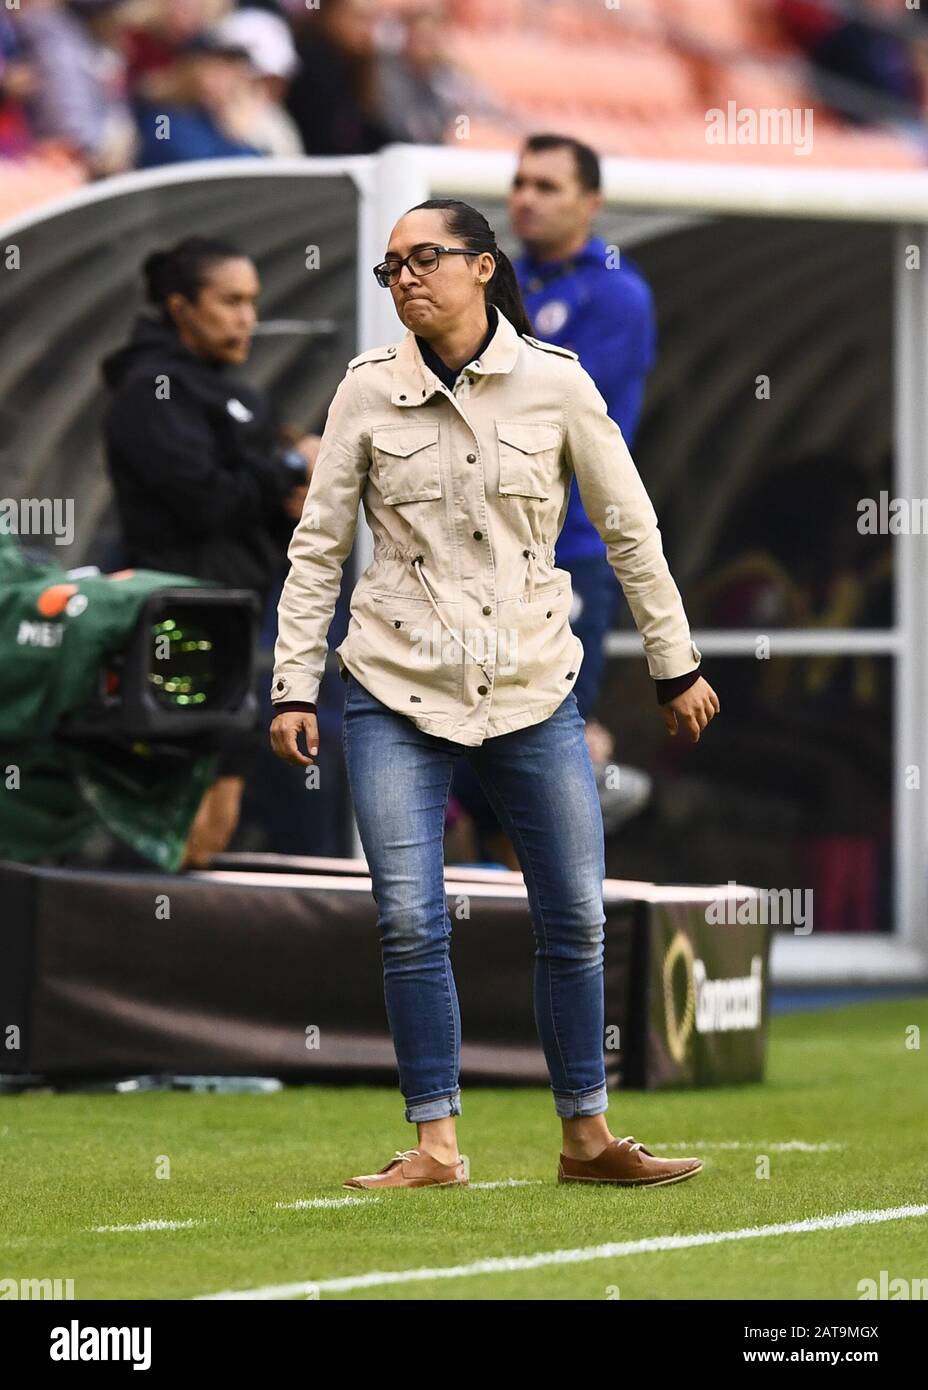 Houston, Texas, USA. 31st Jan, 2020. Costa Rica Women's Olympic head coach Amelia  Valverde reacts to a call in the first half during the CONCACAF Group A  Women's Olympic Qualifying match against